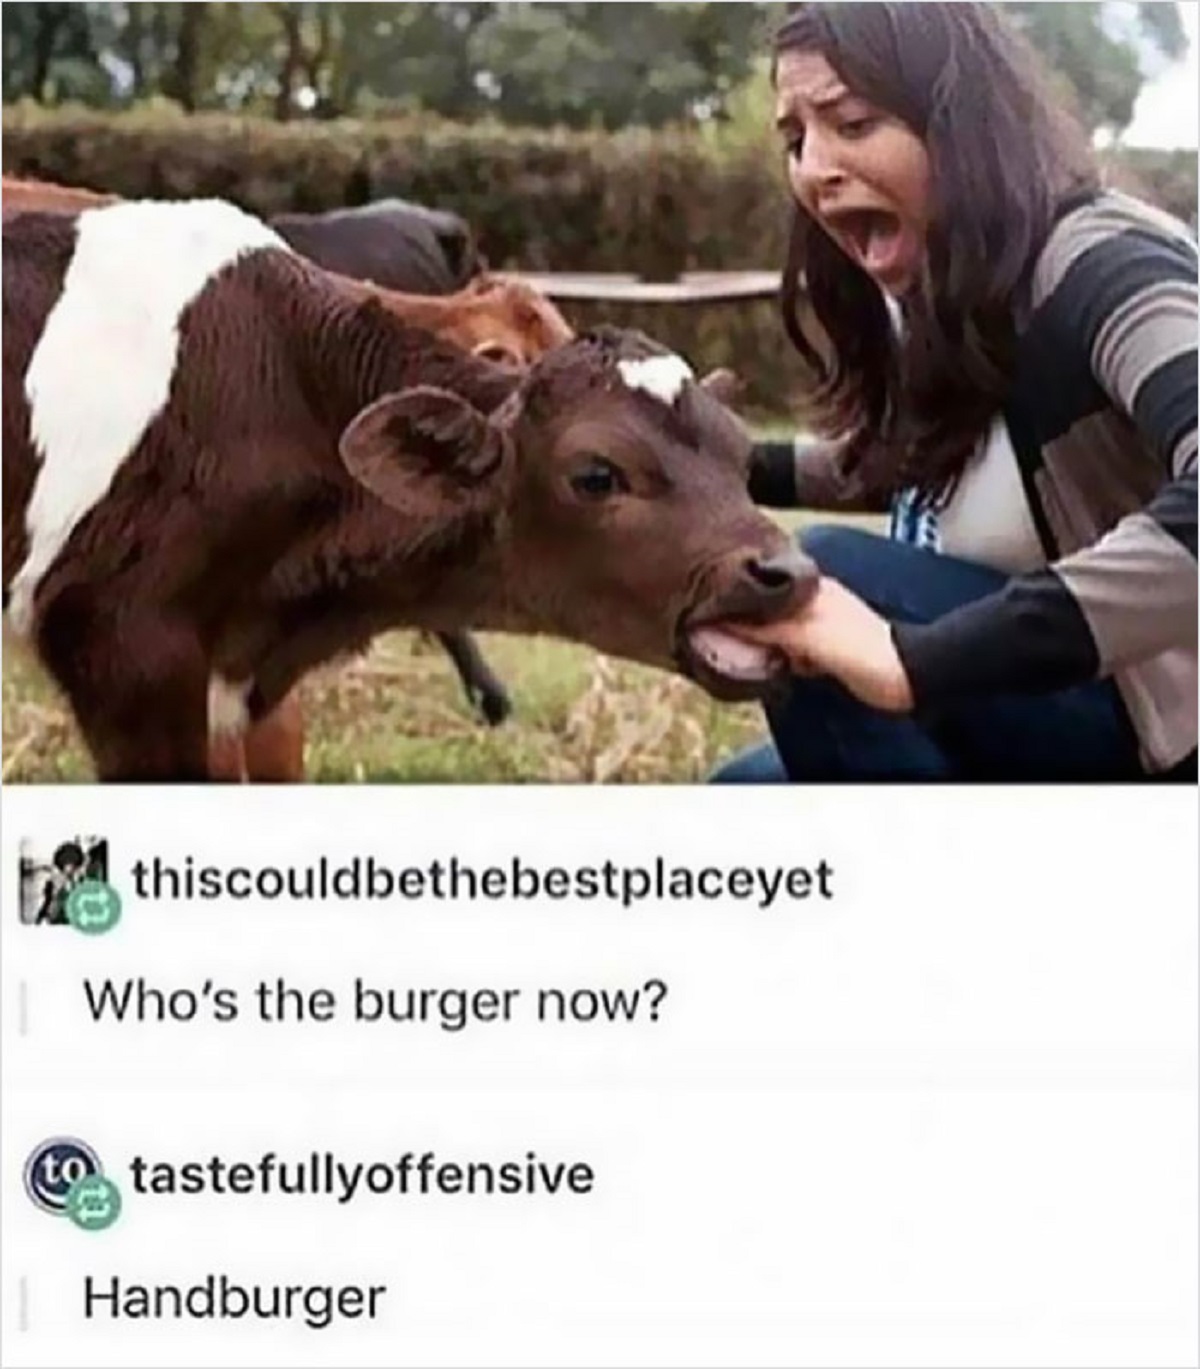 funny replies better than the original - photo caption - Pase thiscouldbethebestplaceyet Who's the burger now? to tastefullyoffensive Handburger